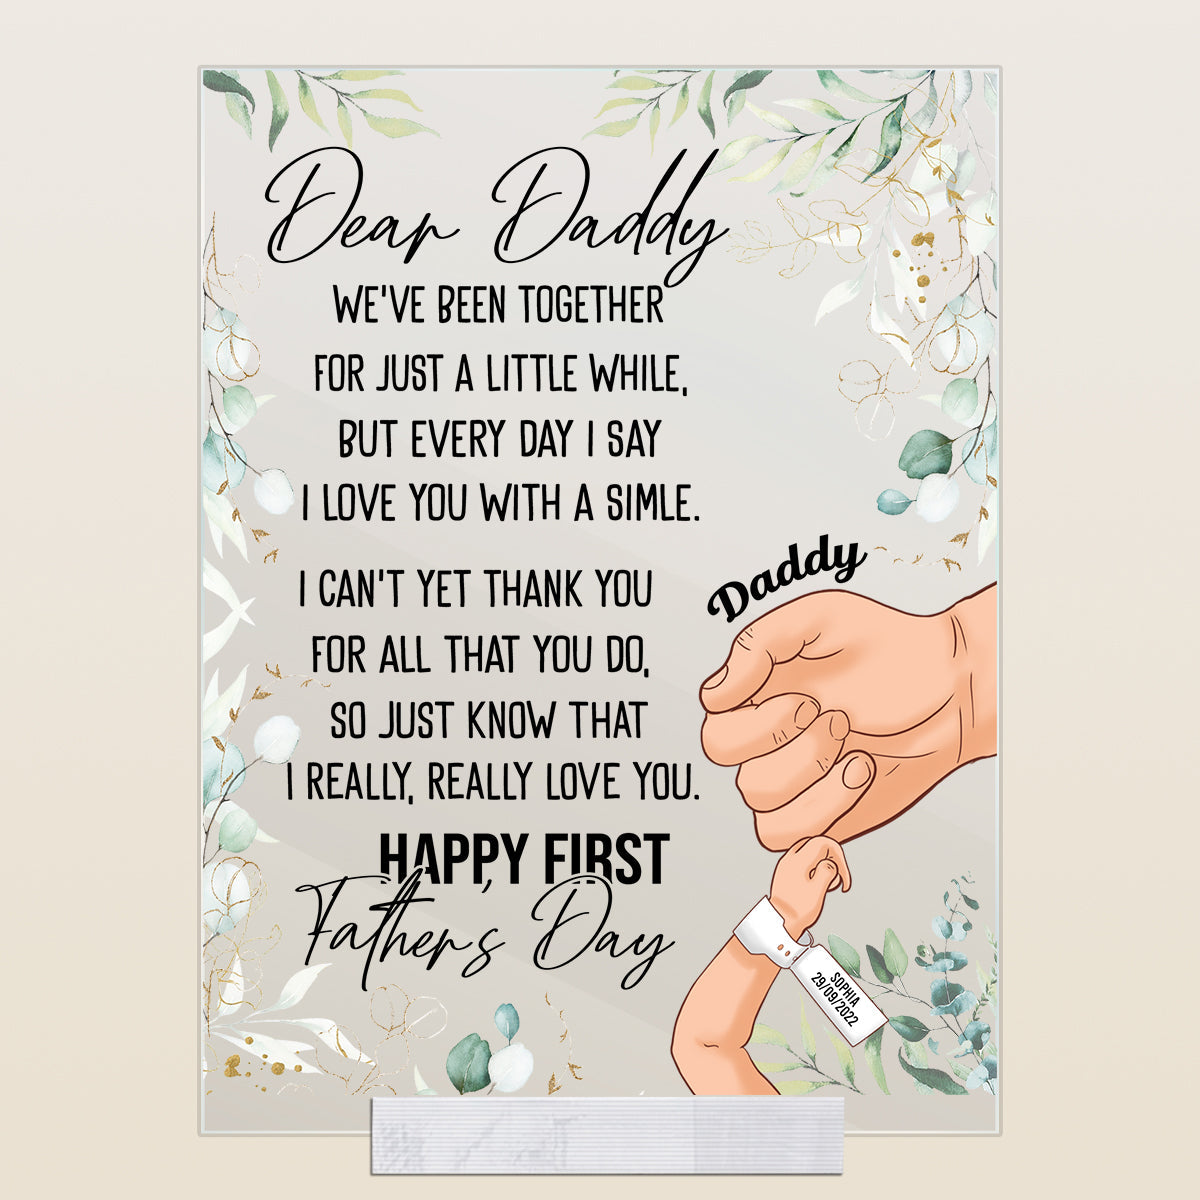 Dear Daddy, I Really Love You - Personalized Acrylic Plaque - Gift For Father, Daddy, First Father's Day DearDaddy_IReallyLoveYou-1.jpg?v=1682481586